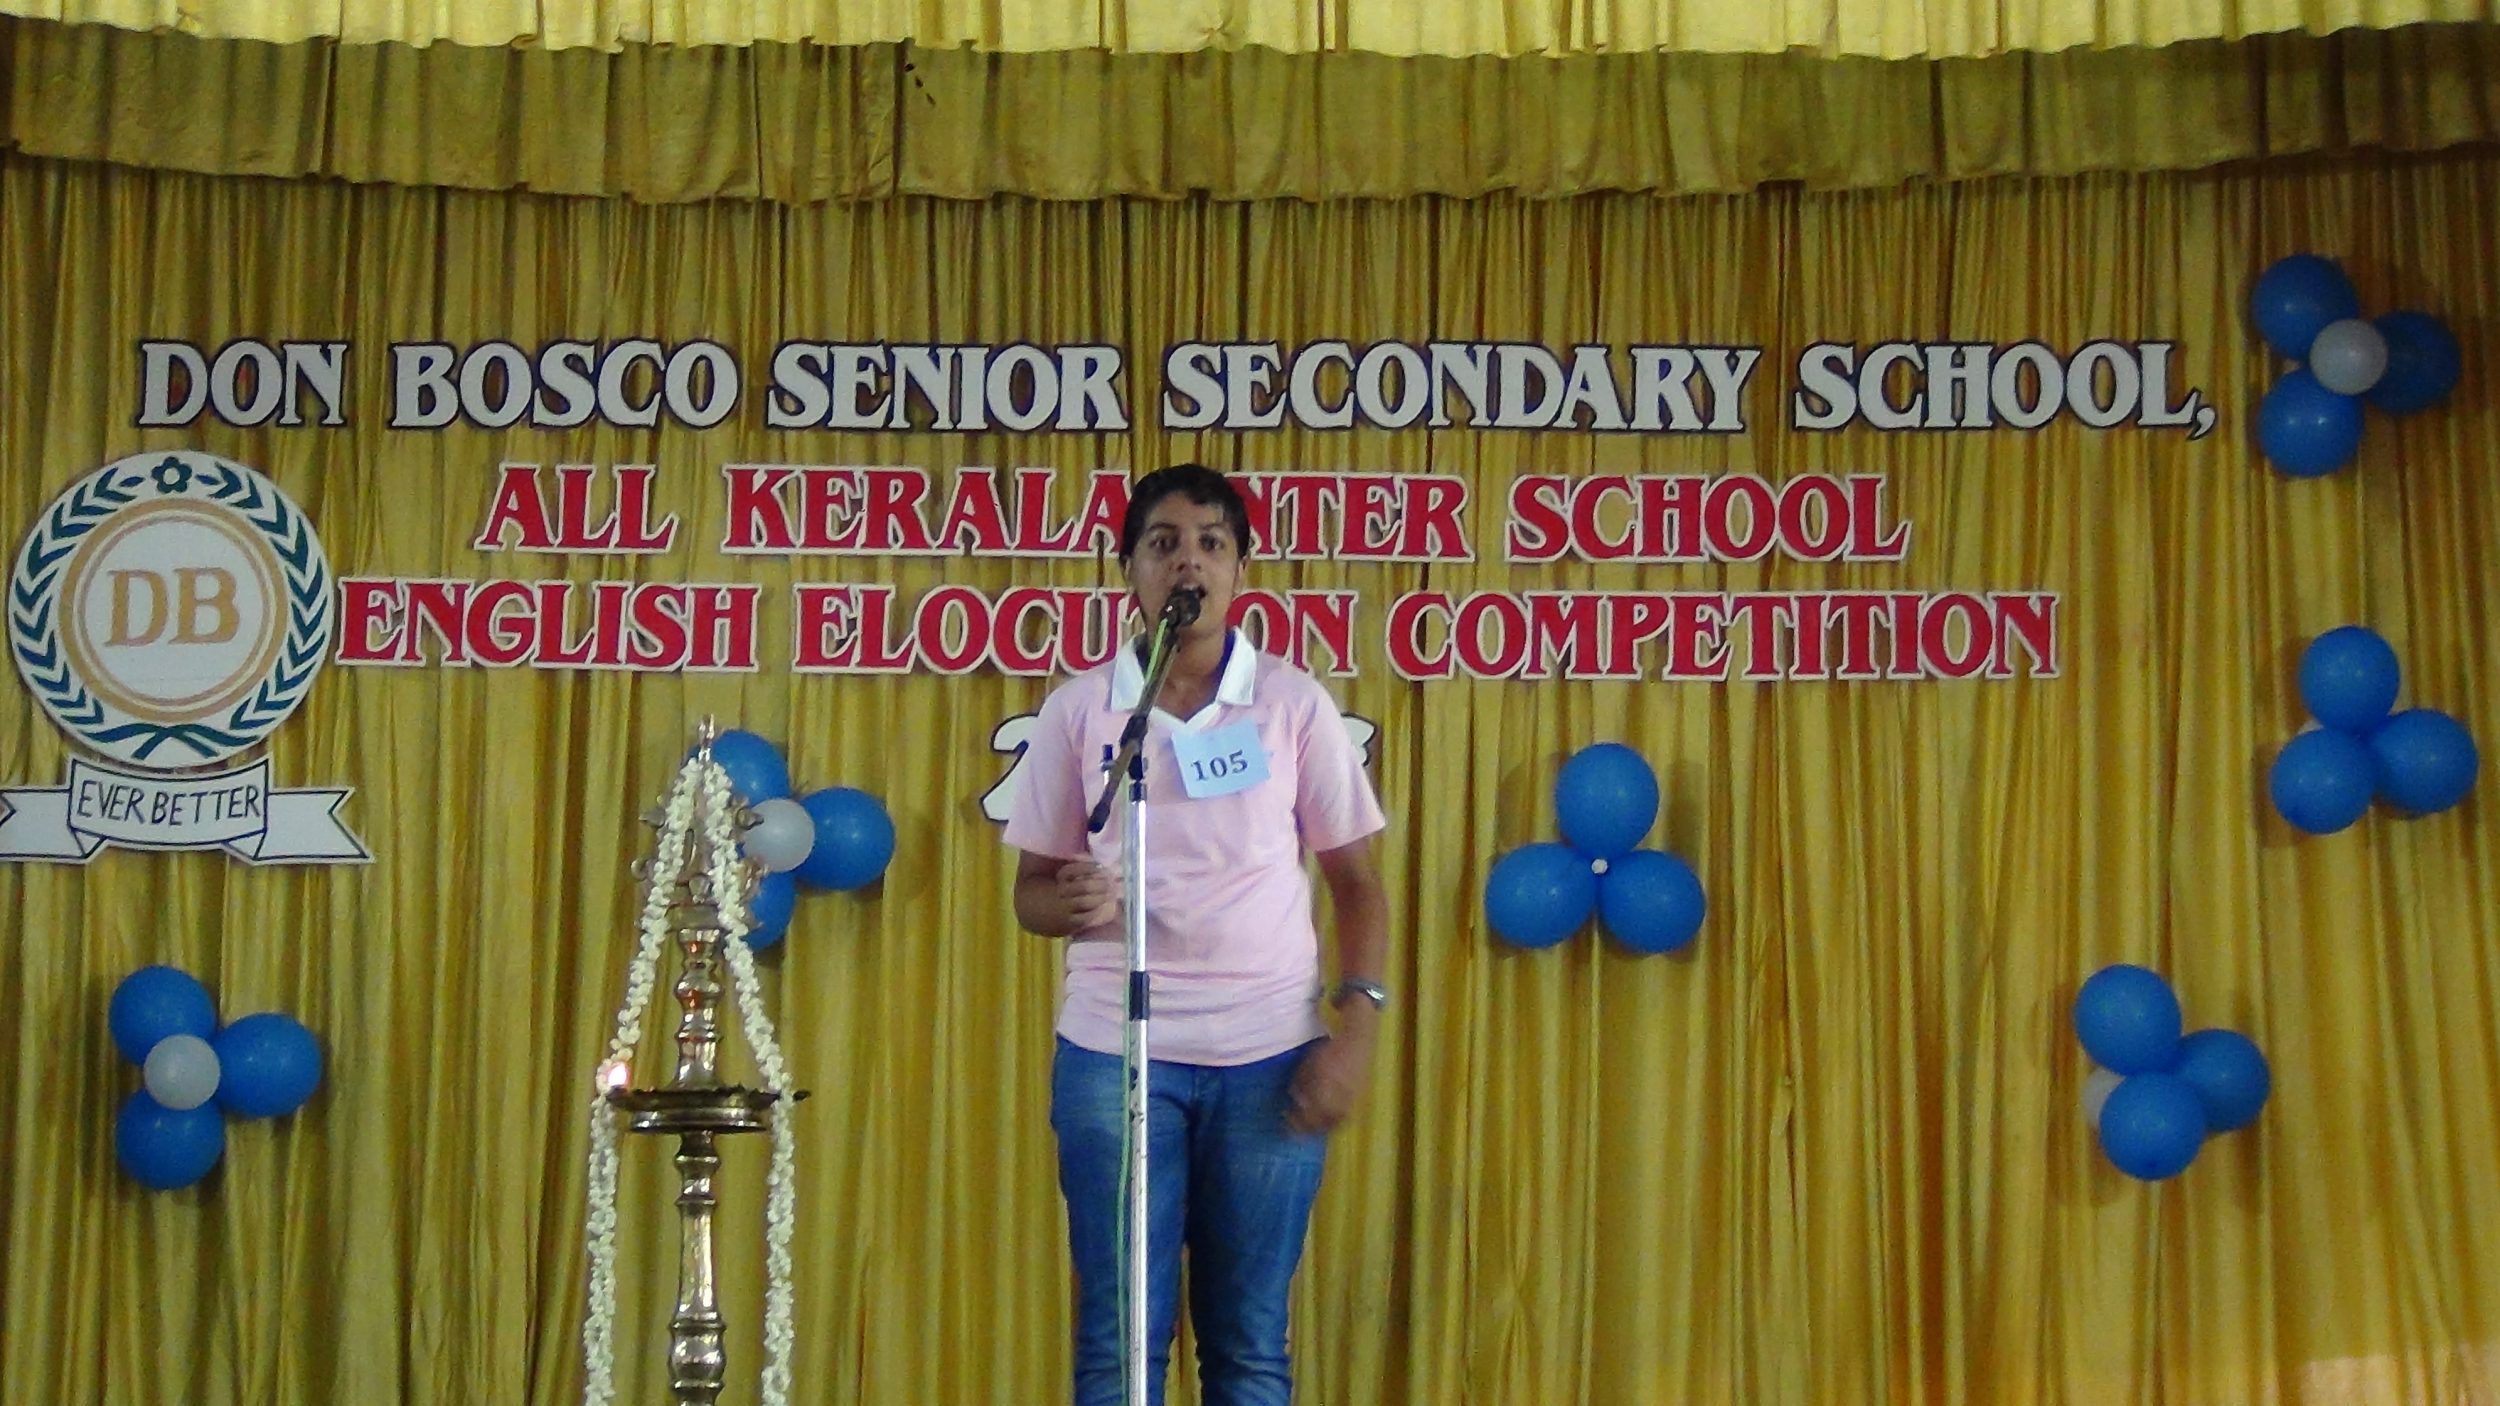 Elocution competition